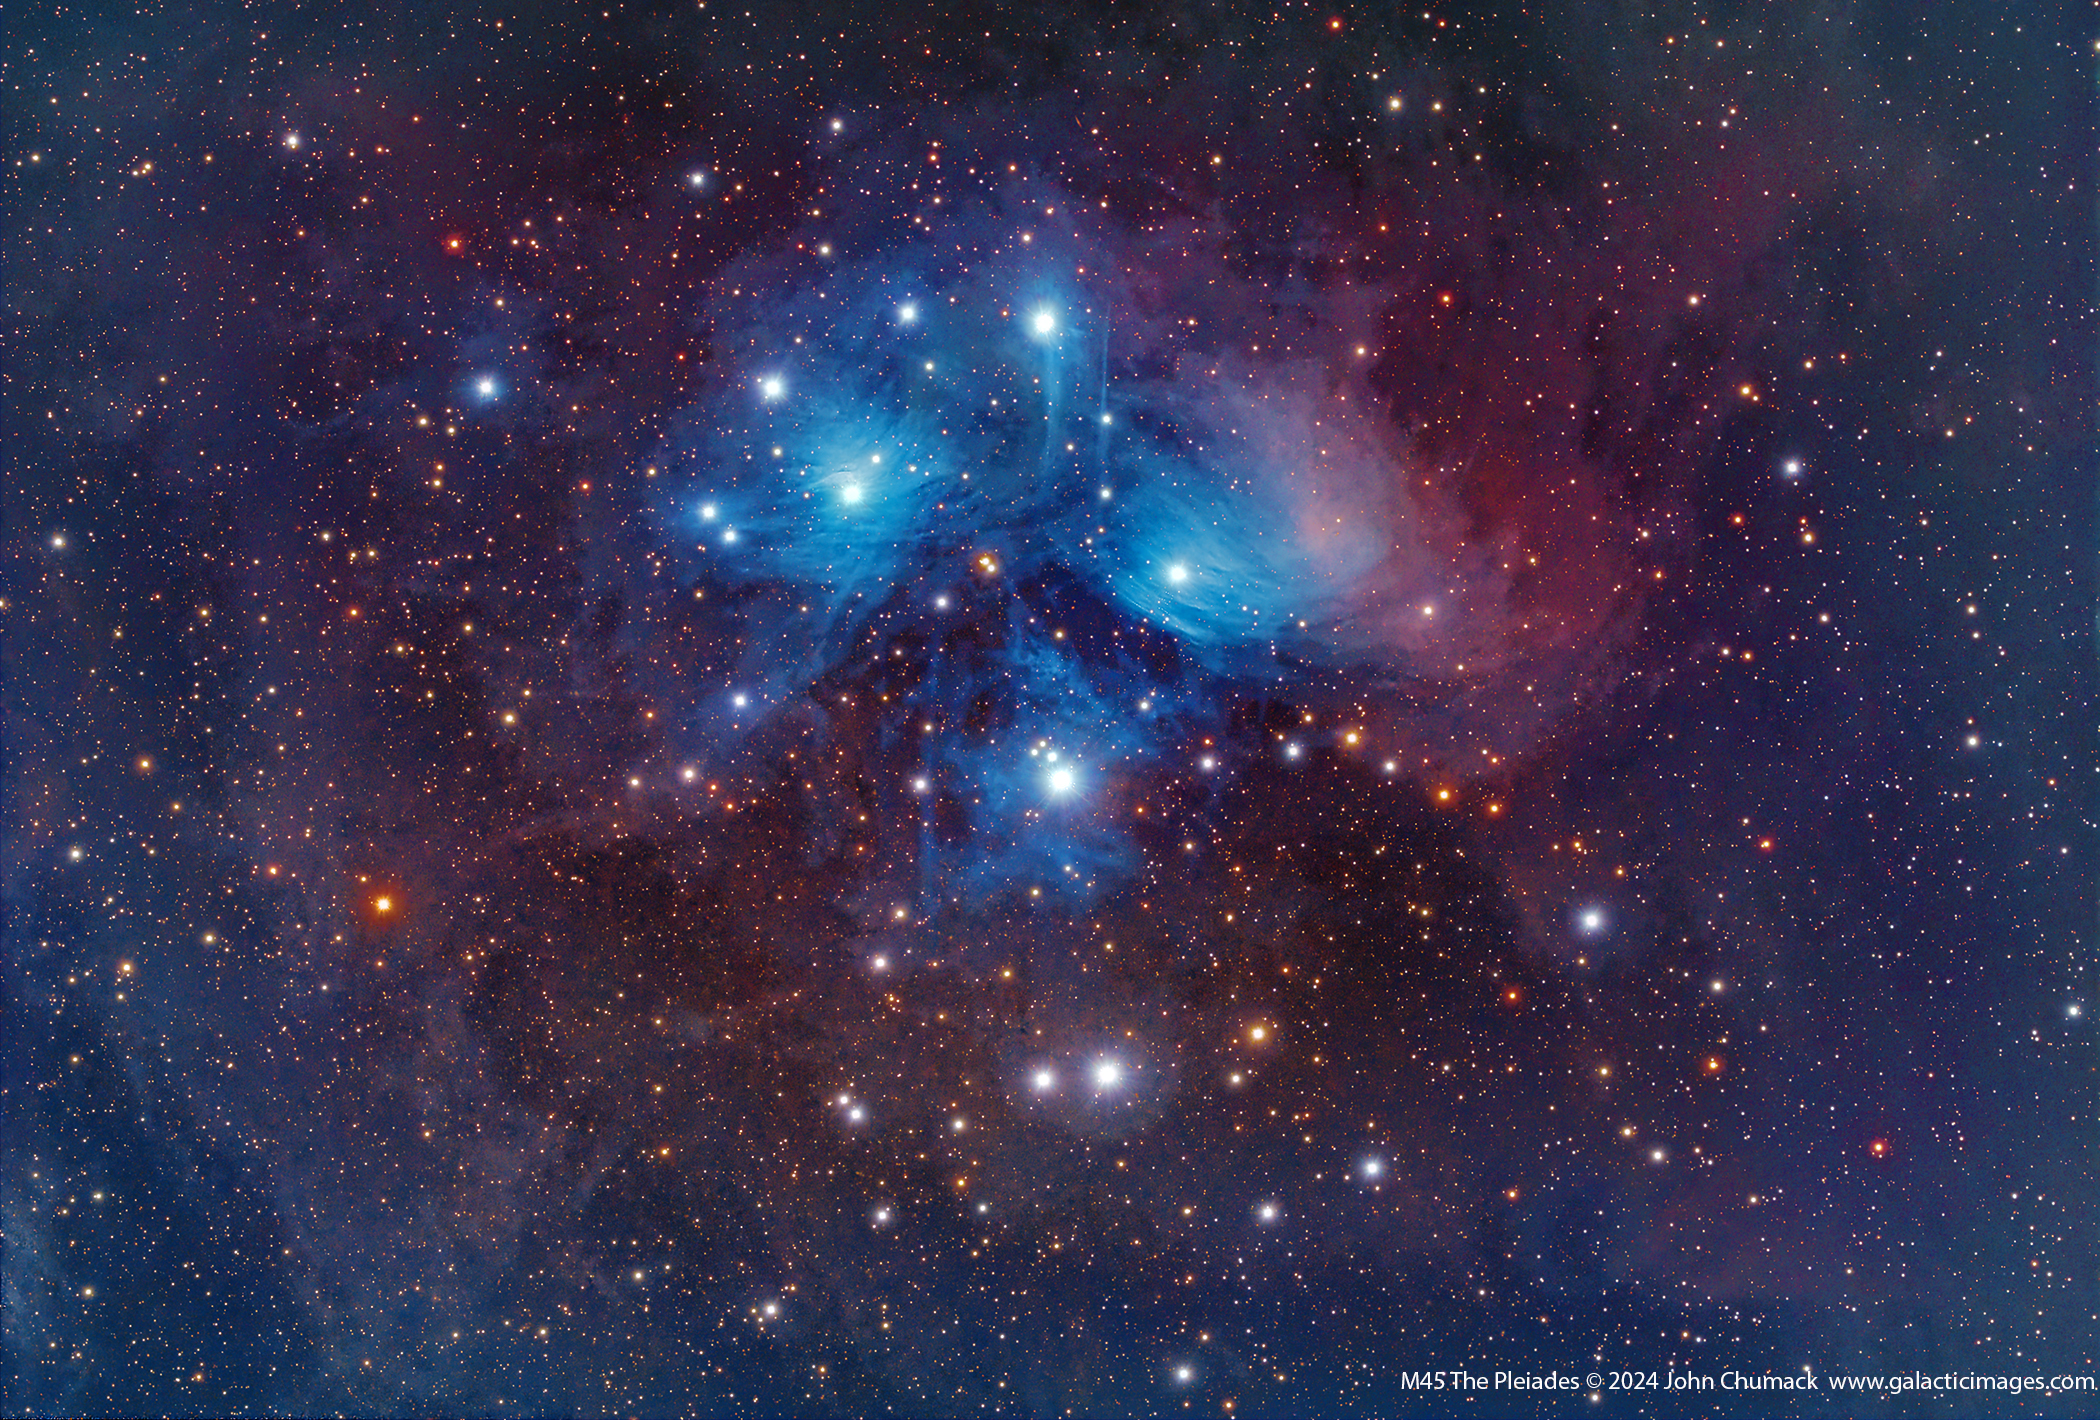 M45 The Pleiades Star Cluster - Seven SIsters